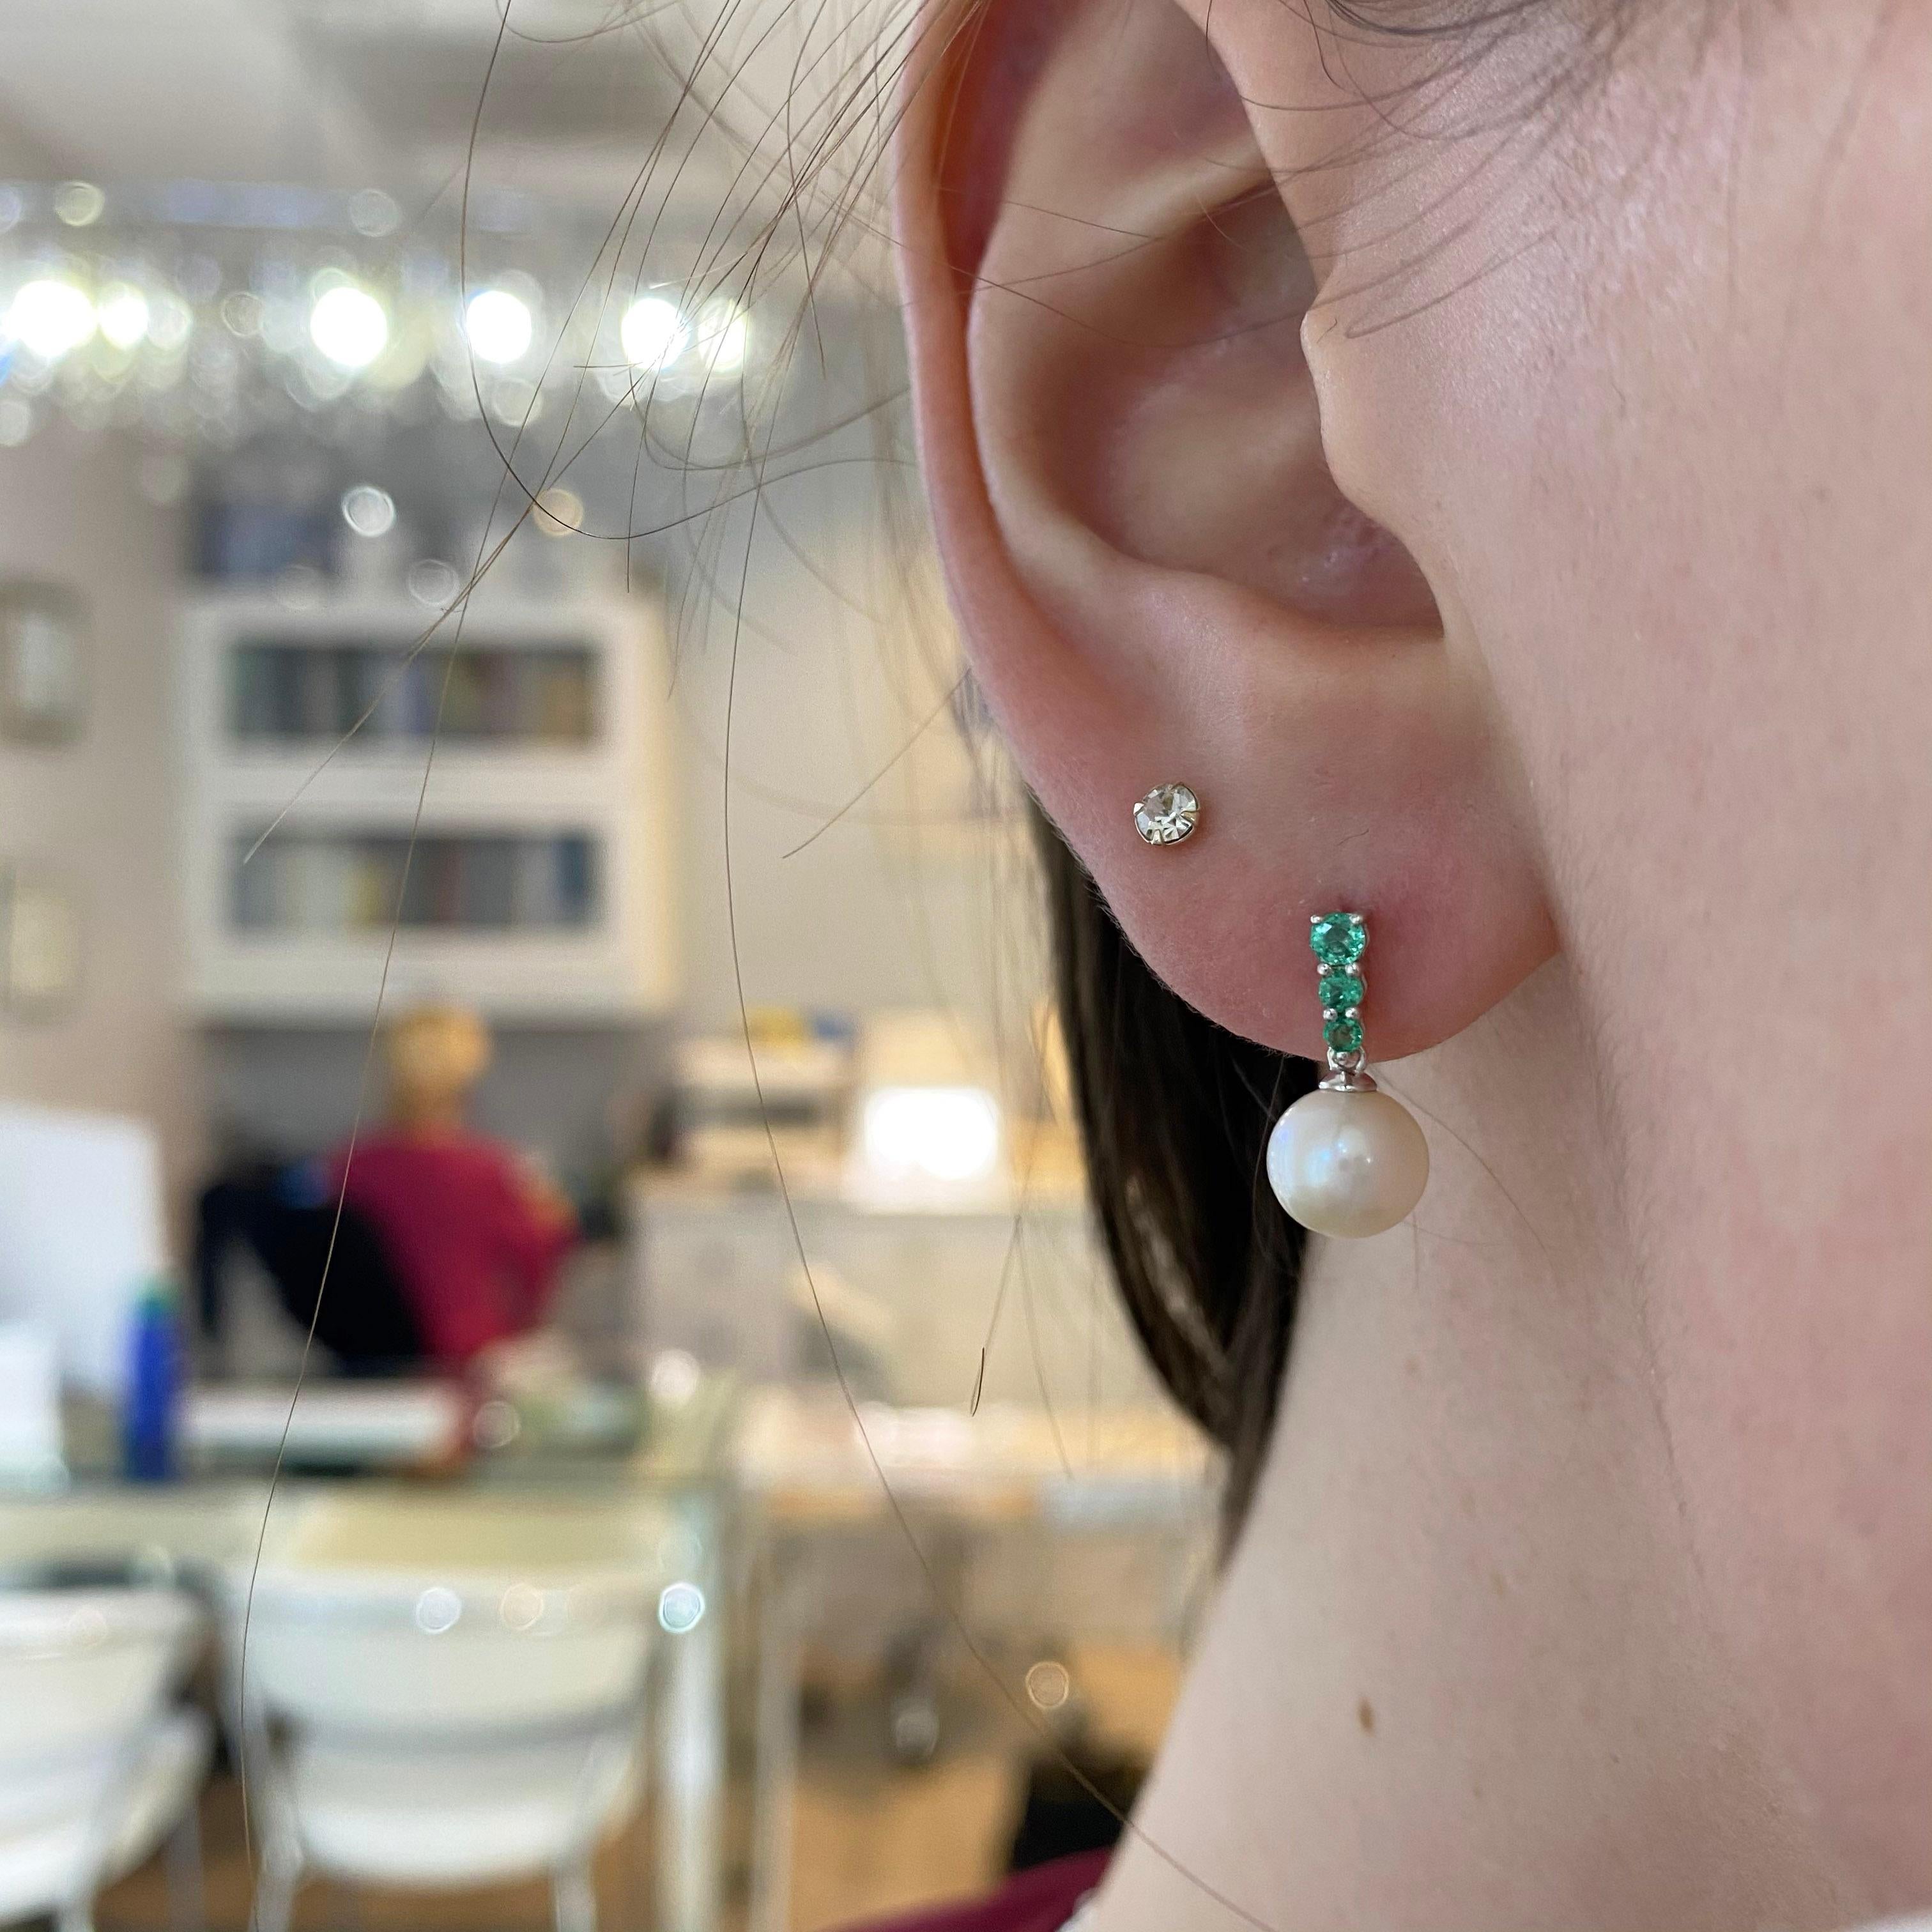 Bright green emeralds and gorgeous white pearls-what a match! The details for these gorgeous earrings are listed below:
Metal Quality: 14 k White Gold 
Earring Type: Drop 
Gemstone: Emerald 
Gemstone number: 3
Gemstone Weight: .25 carats
Gemstone